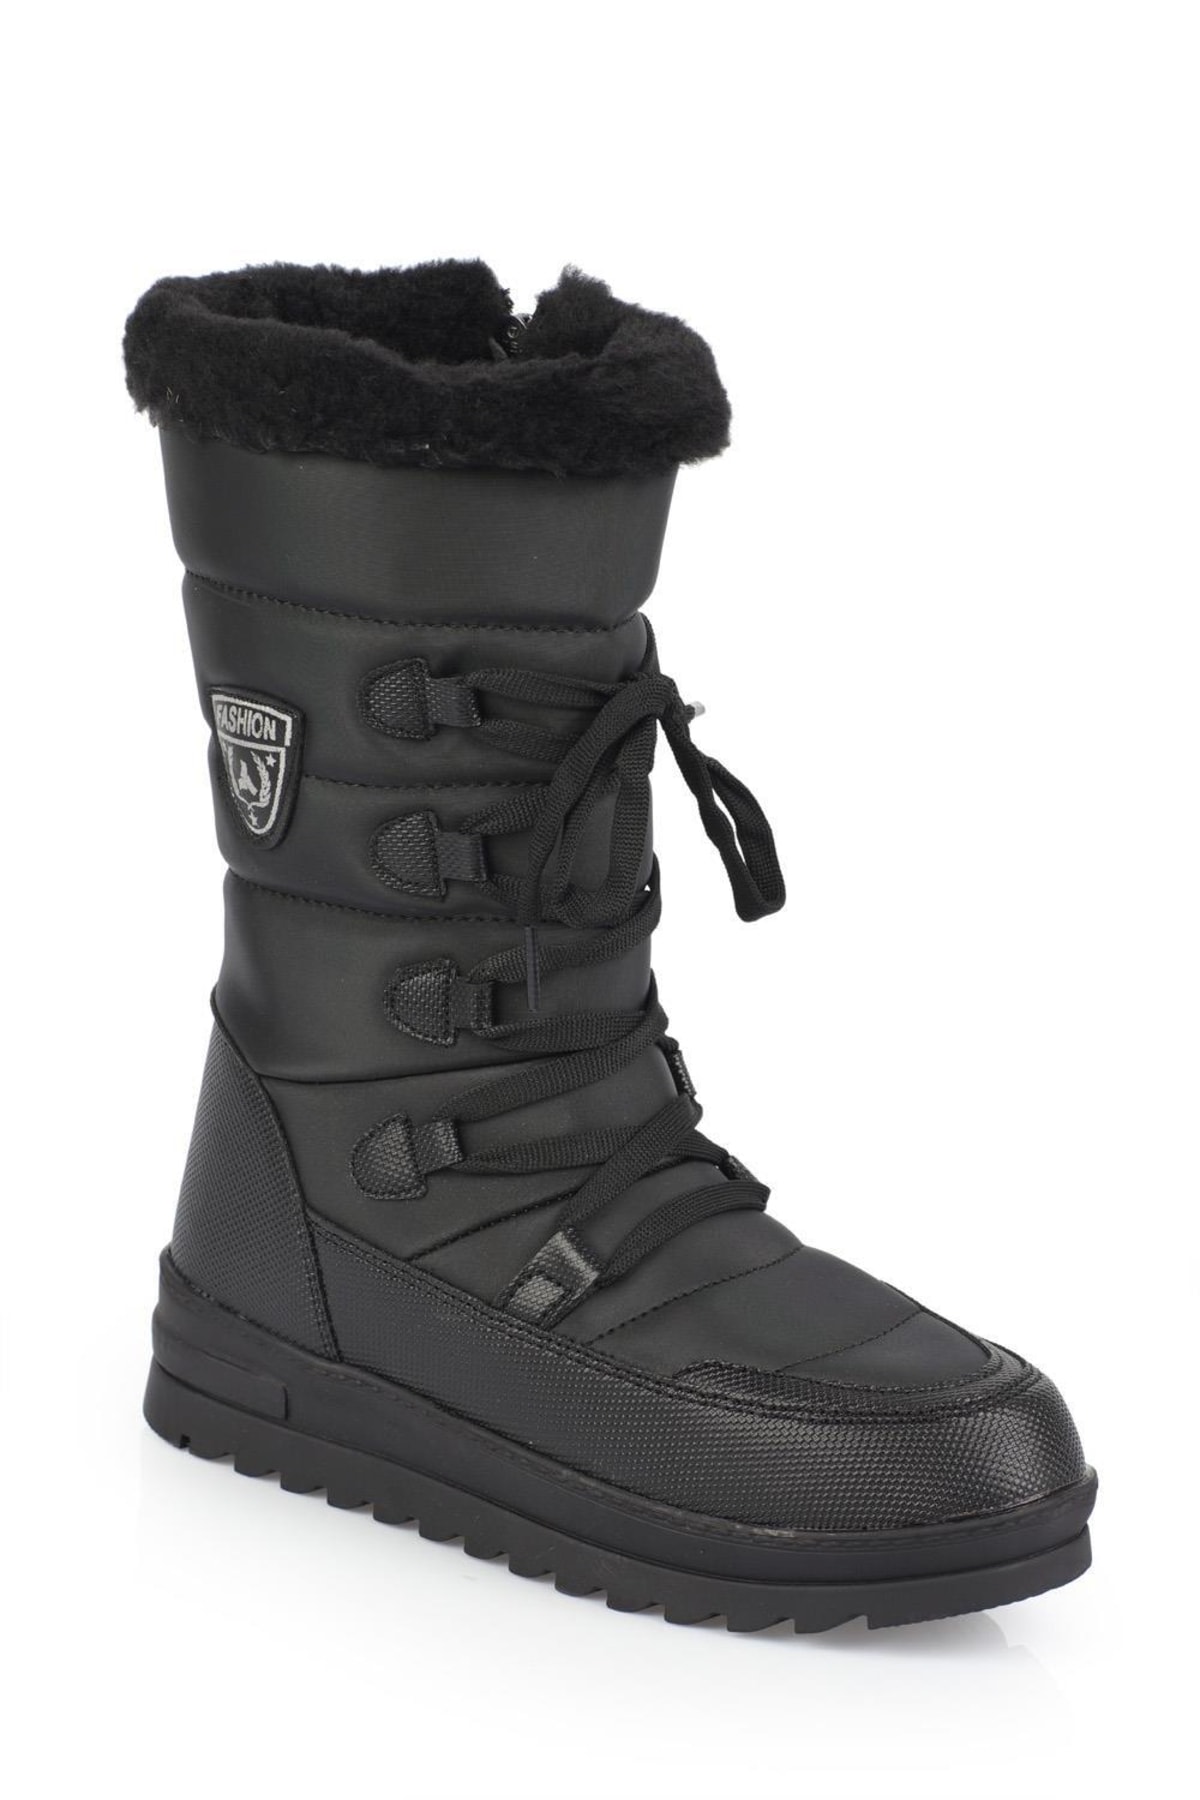 Capone Outfitters Women's Snow Boots with Trak Sole, Side Zipper, Fur Collar, Lace-up and Parachute Fabric